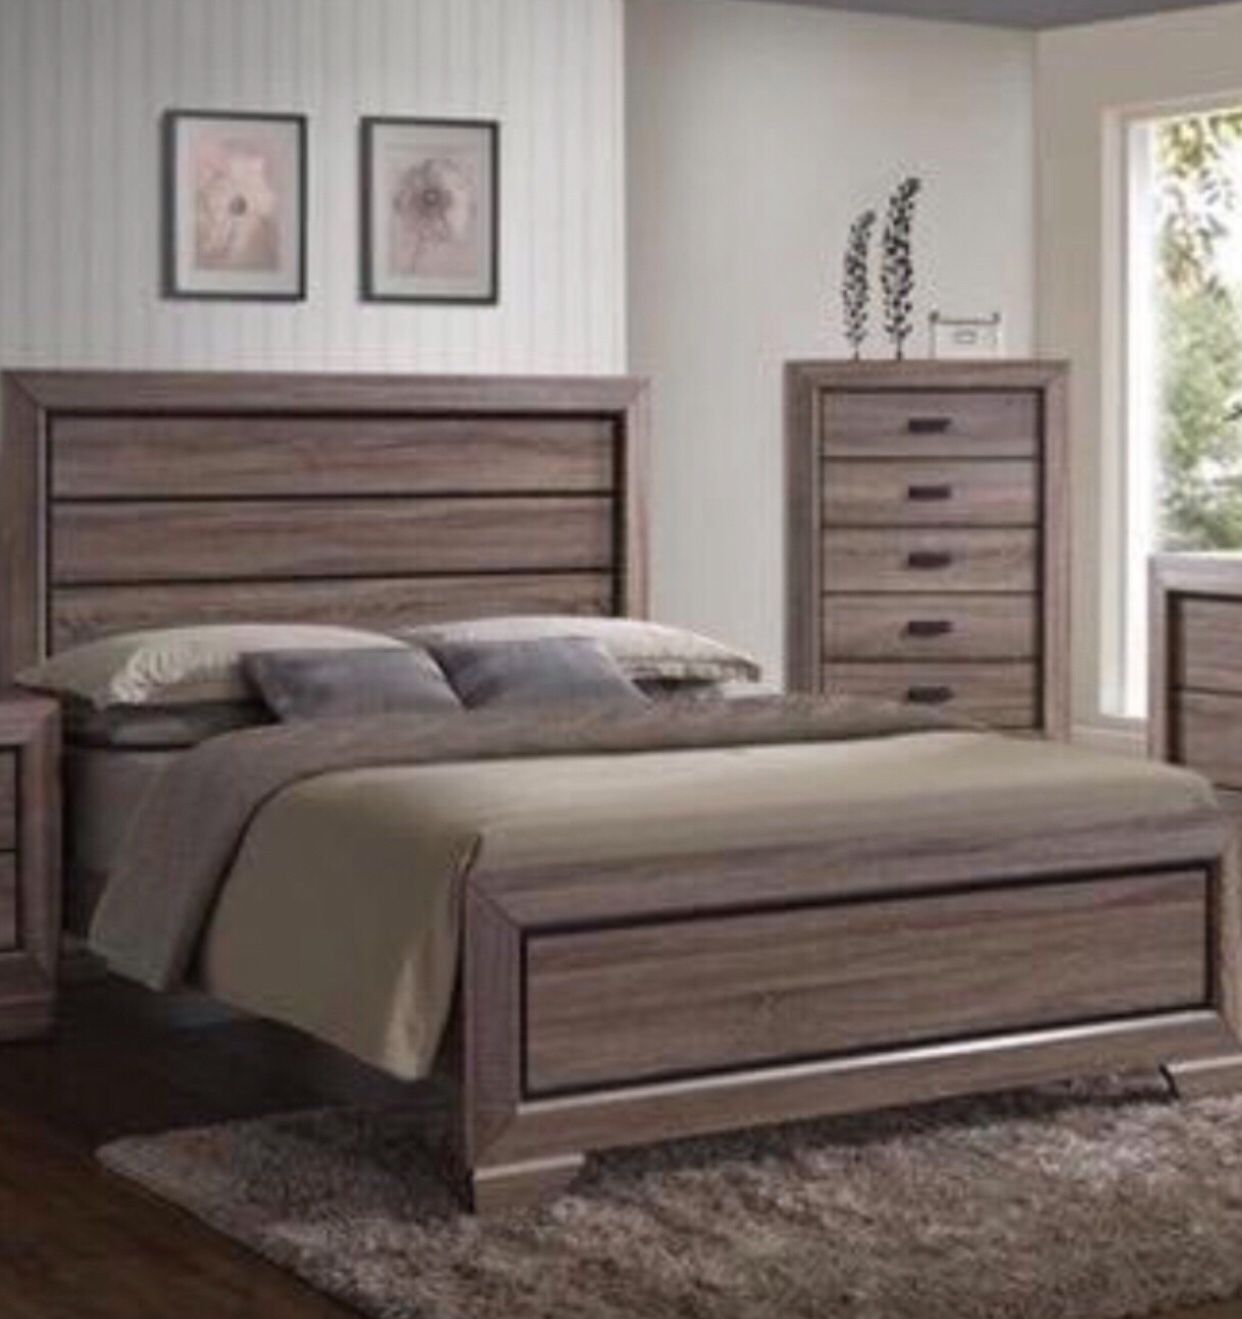 Brand New Queen Bed With Mattress $399.